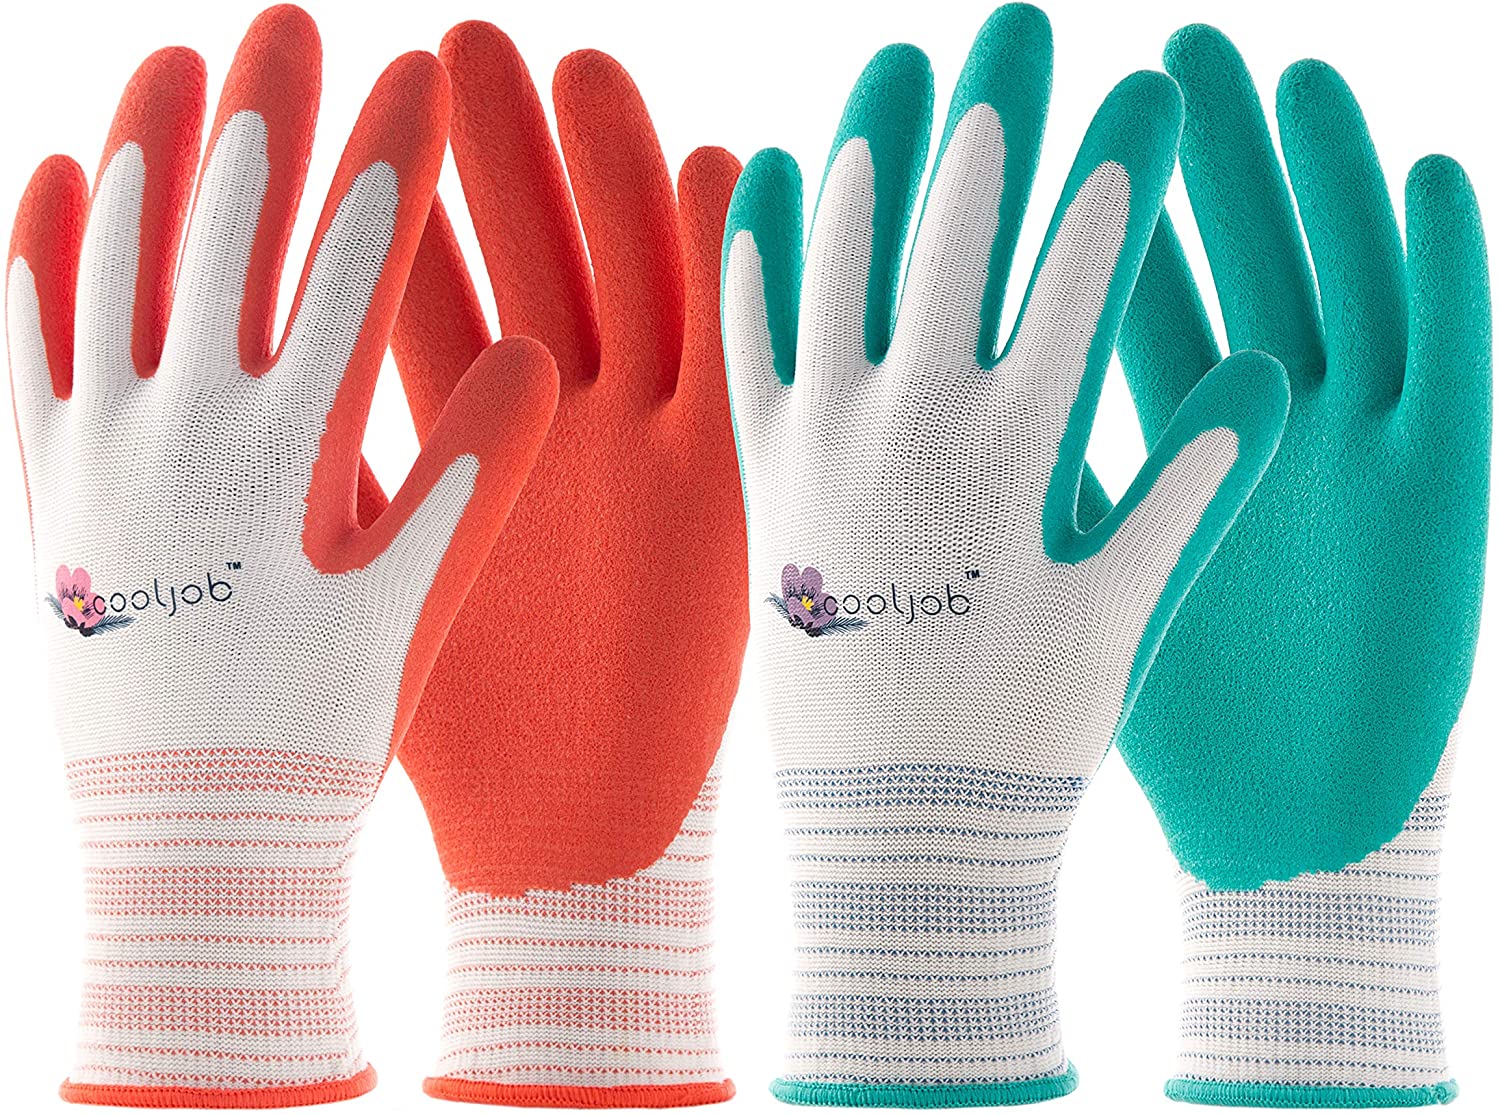 COOLJOB Knitted Lady’s Gardening Gloves, 6-Pair